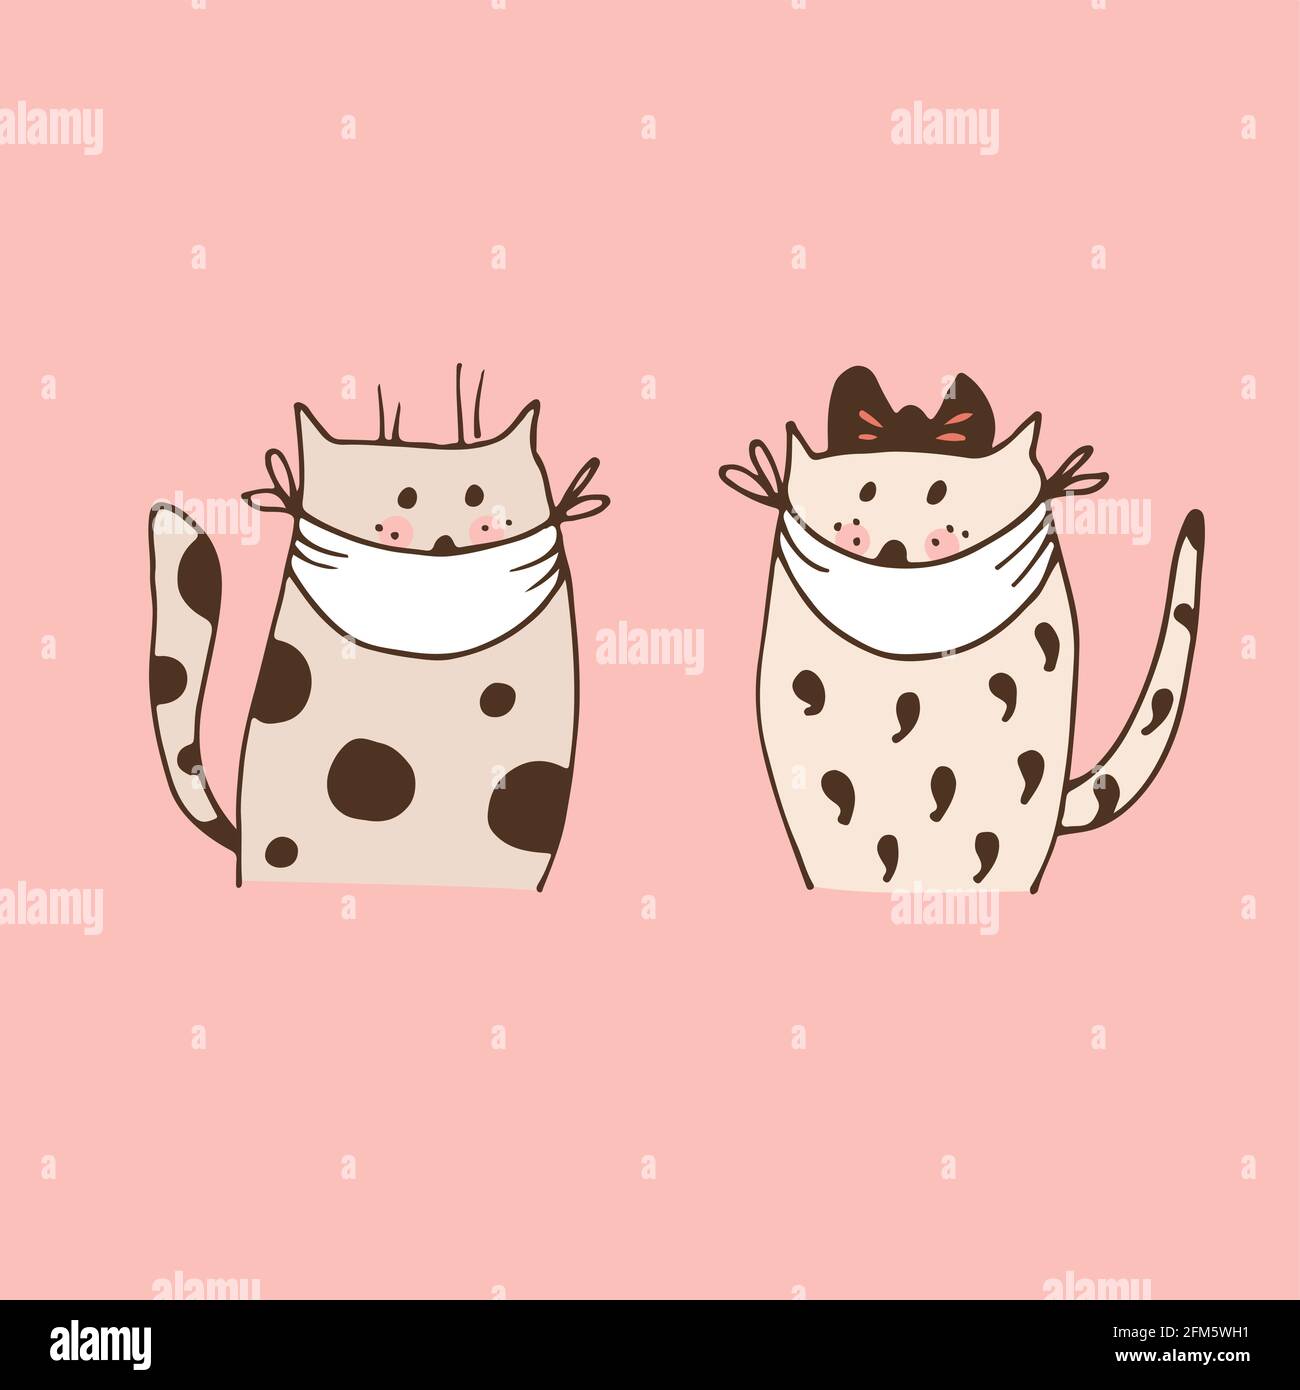 Two cats in face masks vector illustration, isolated on pink background Stock Vector